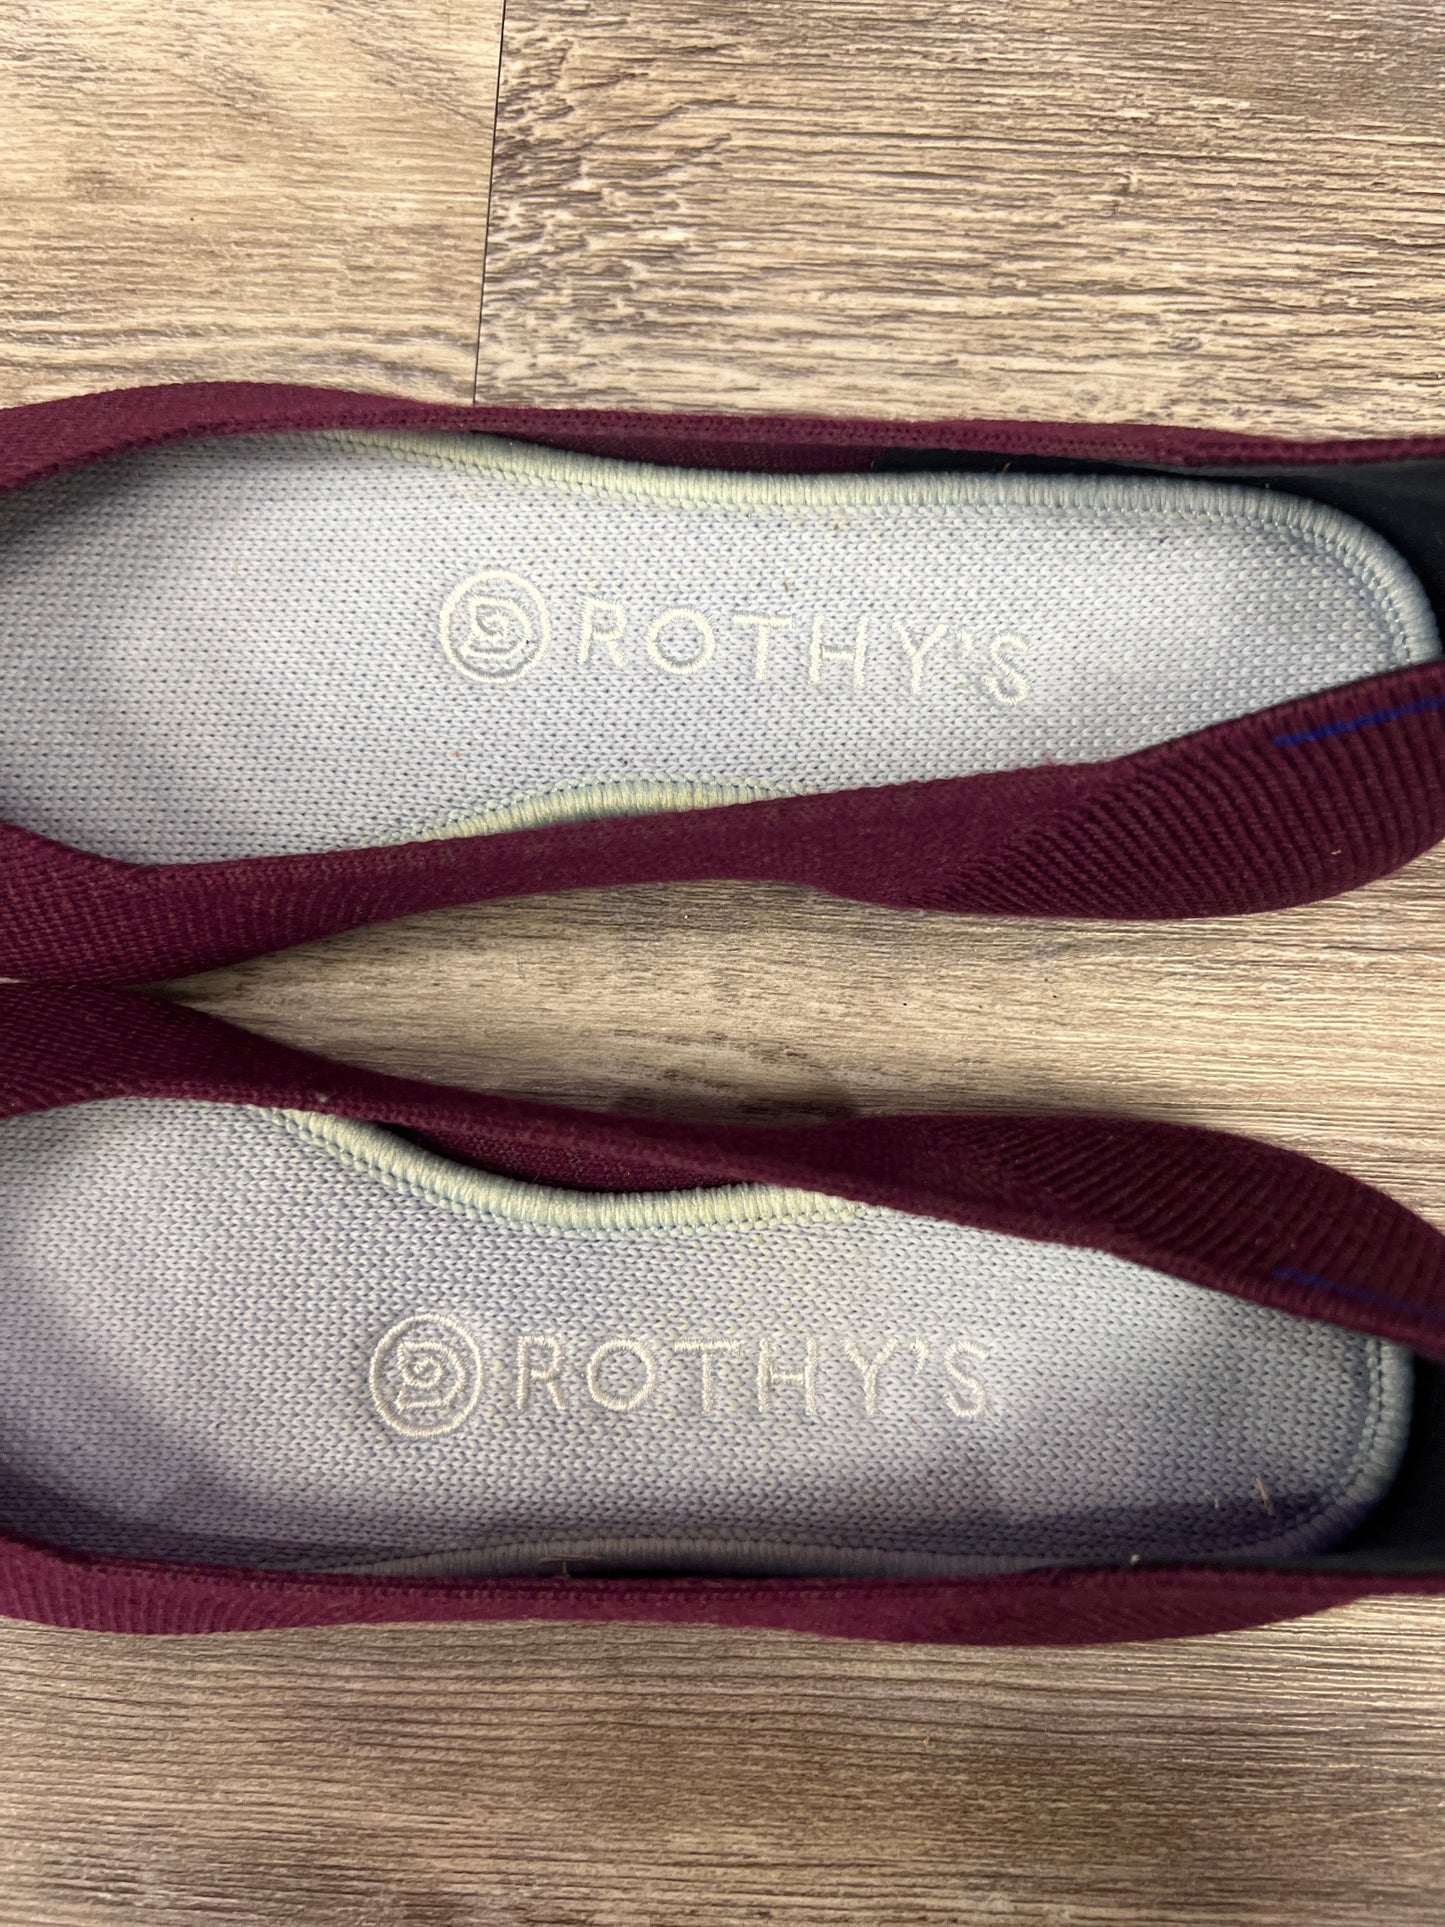 Shoes Flats By Rothys  Size: 8